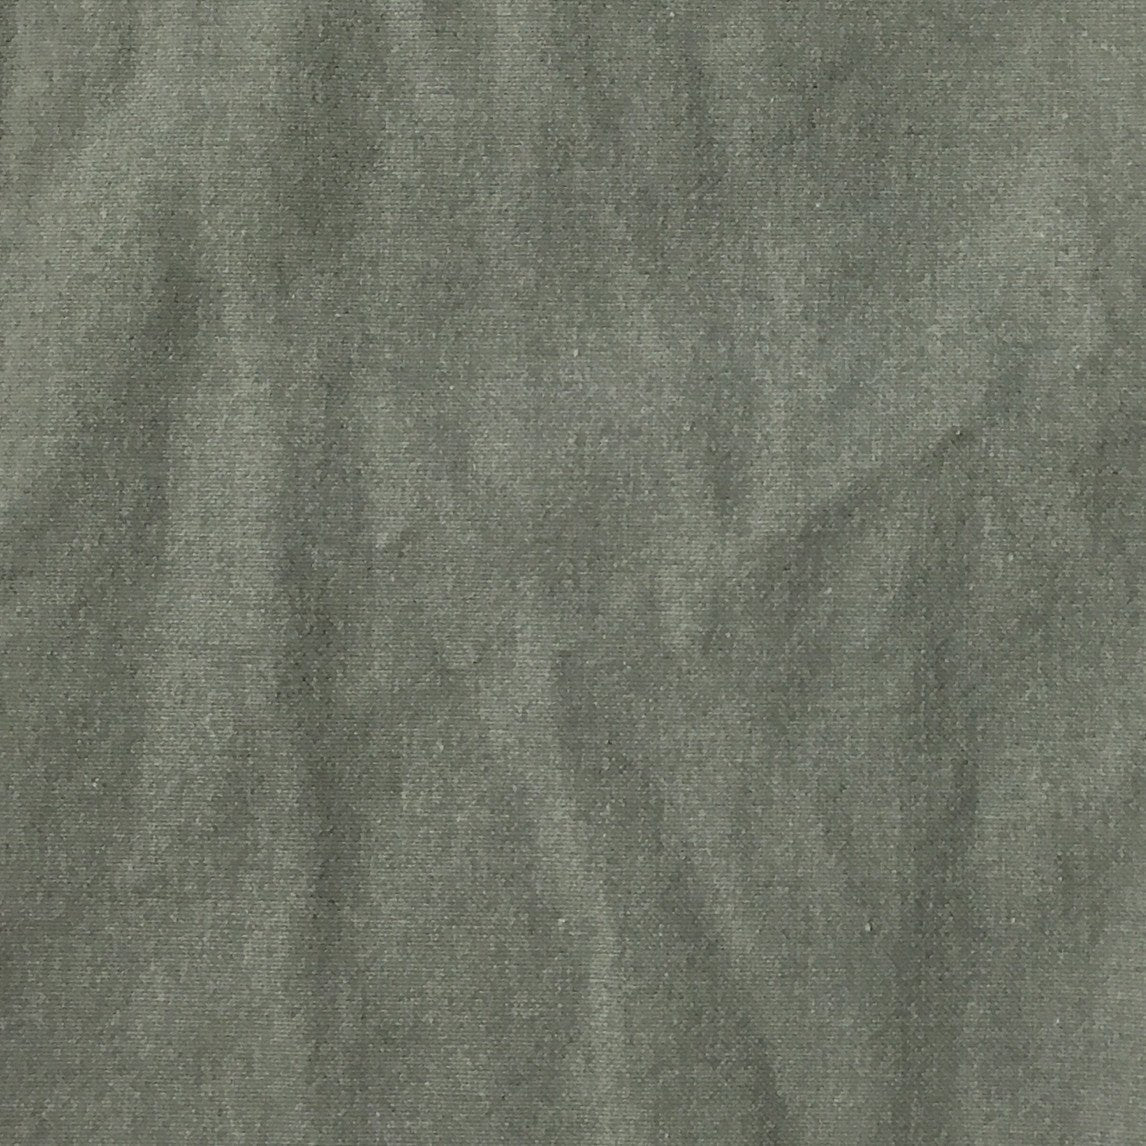 Linen Blend Fabric by the Yard